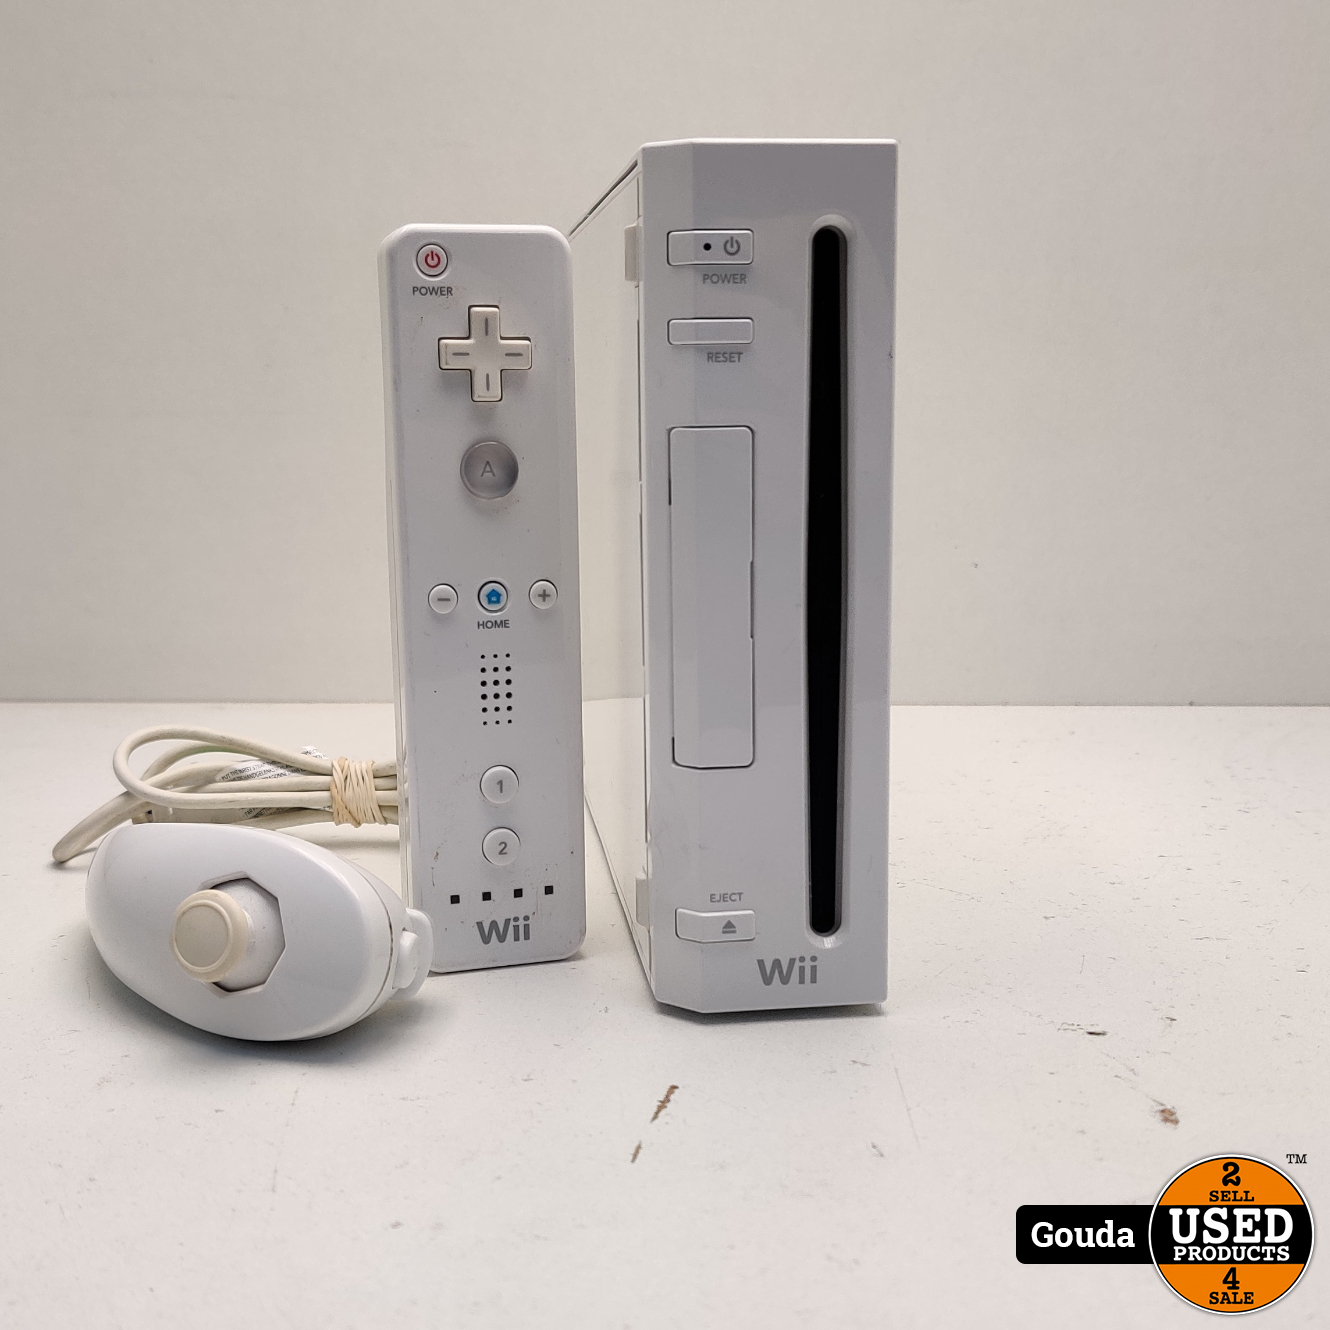 Wii - Used Products Gouda